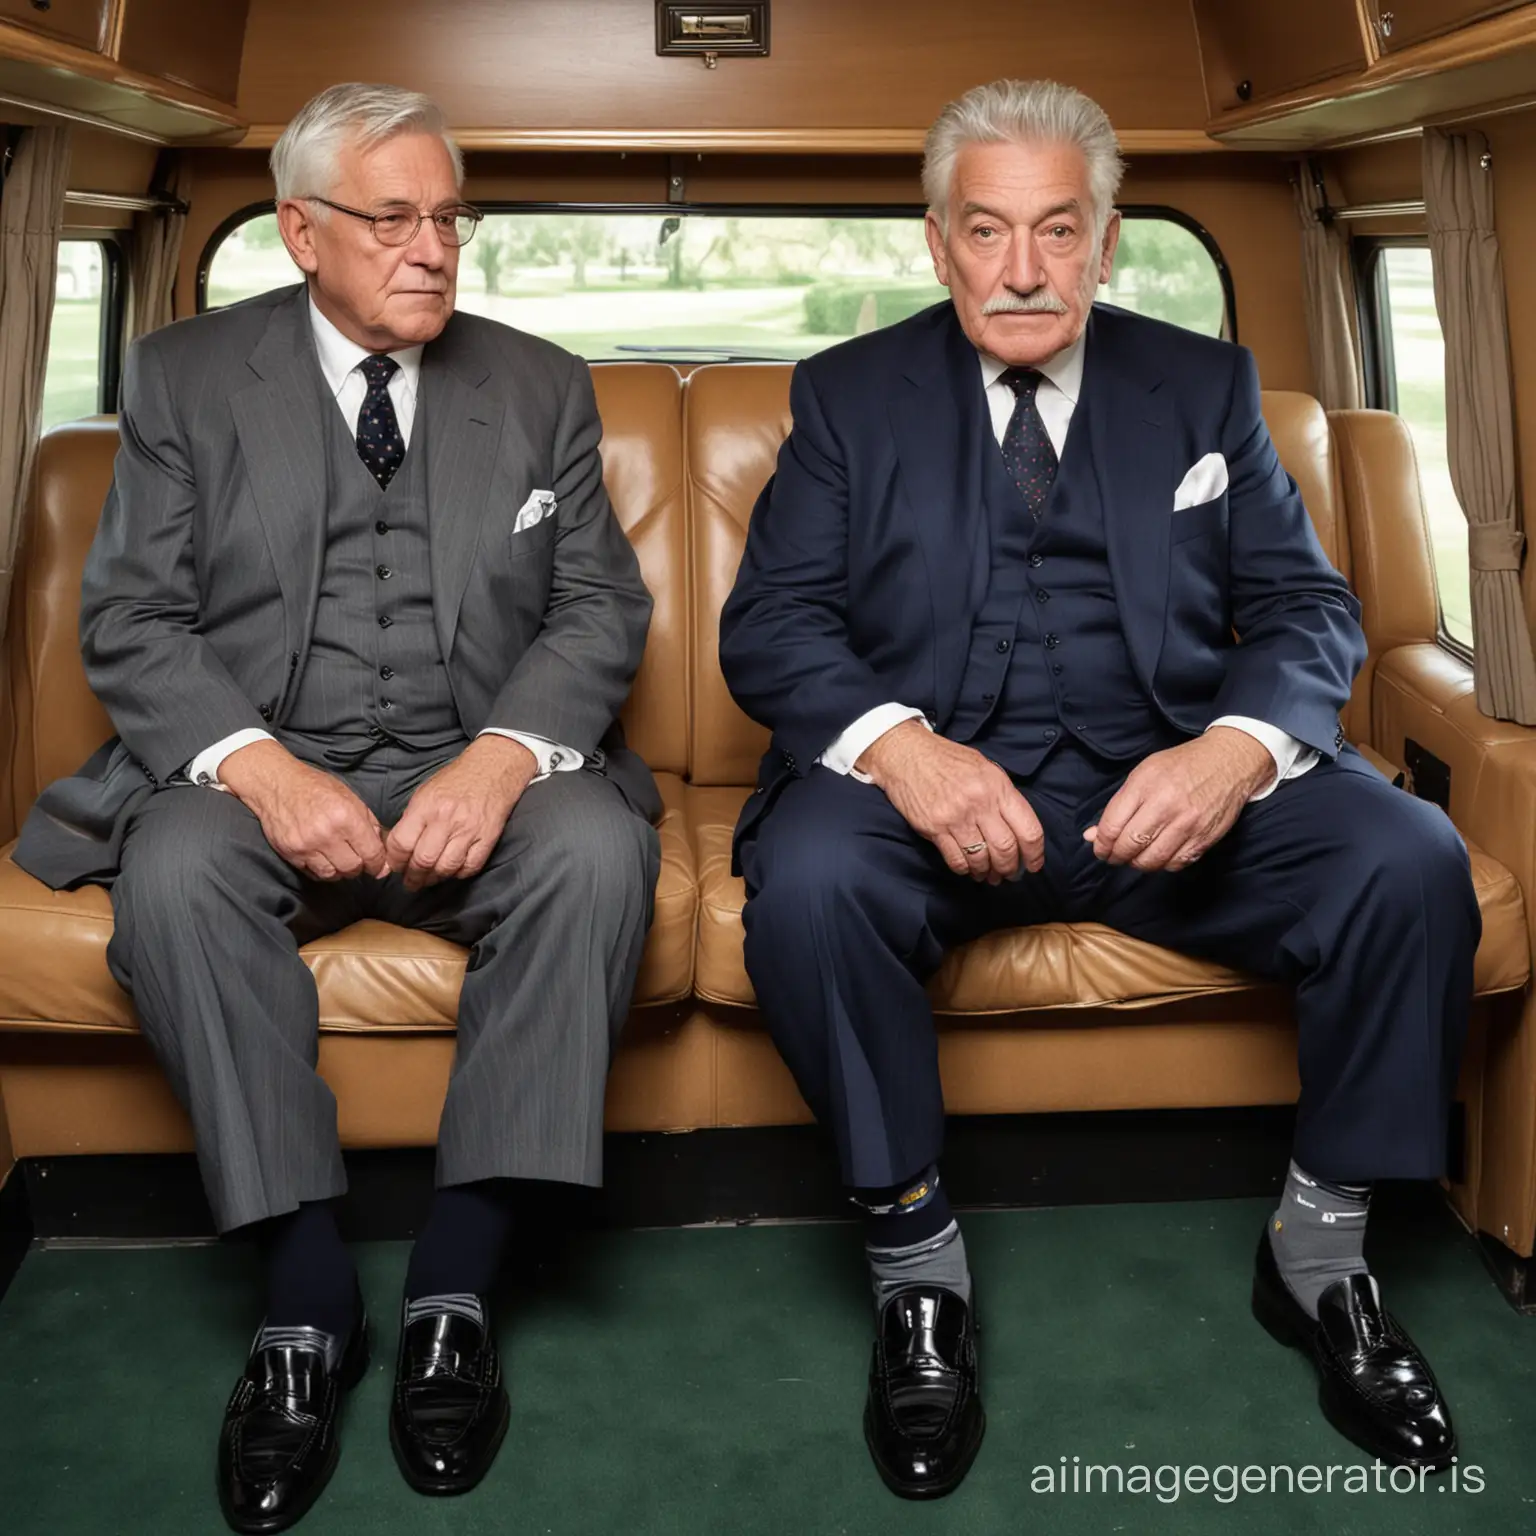 Two American fat elderly men, both 80 years old, shot height, wearing different suits, navy socks, black loafers, silver hair, sitting on a coach, full body shot, must show face, private